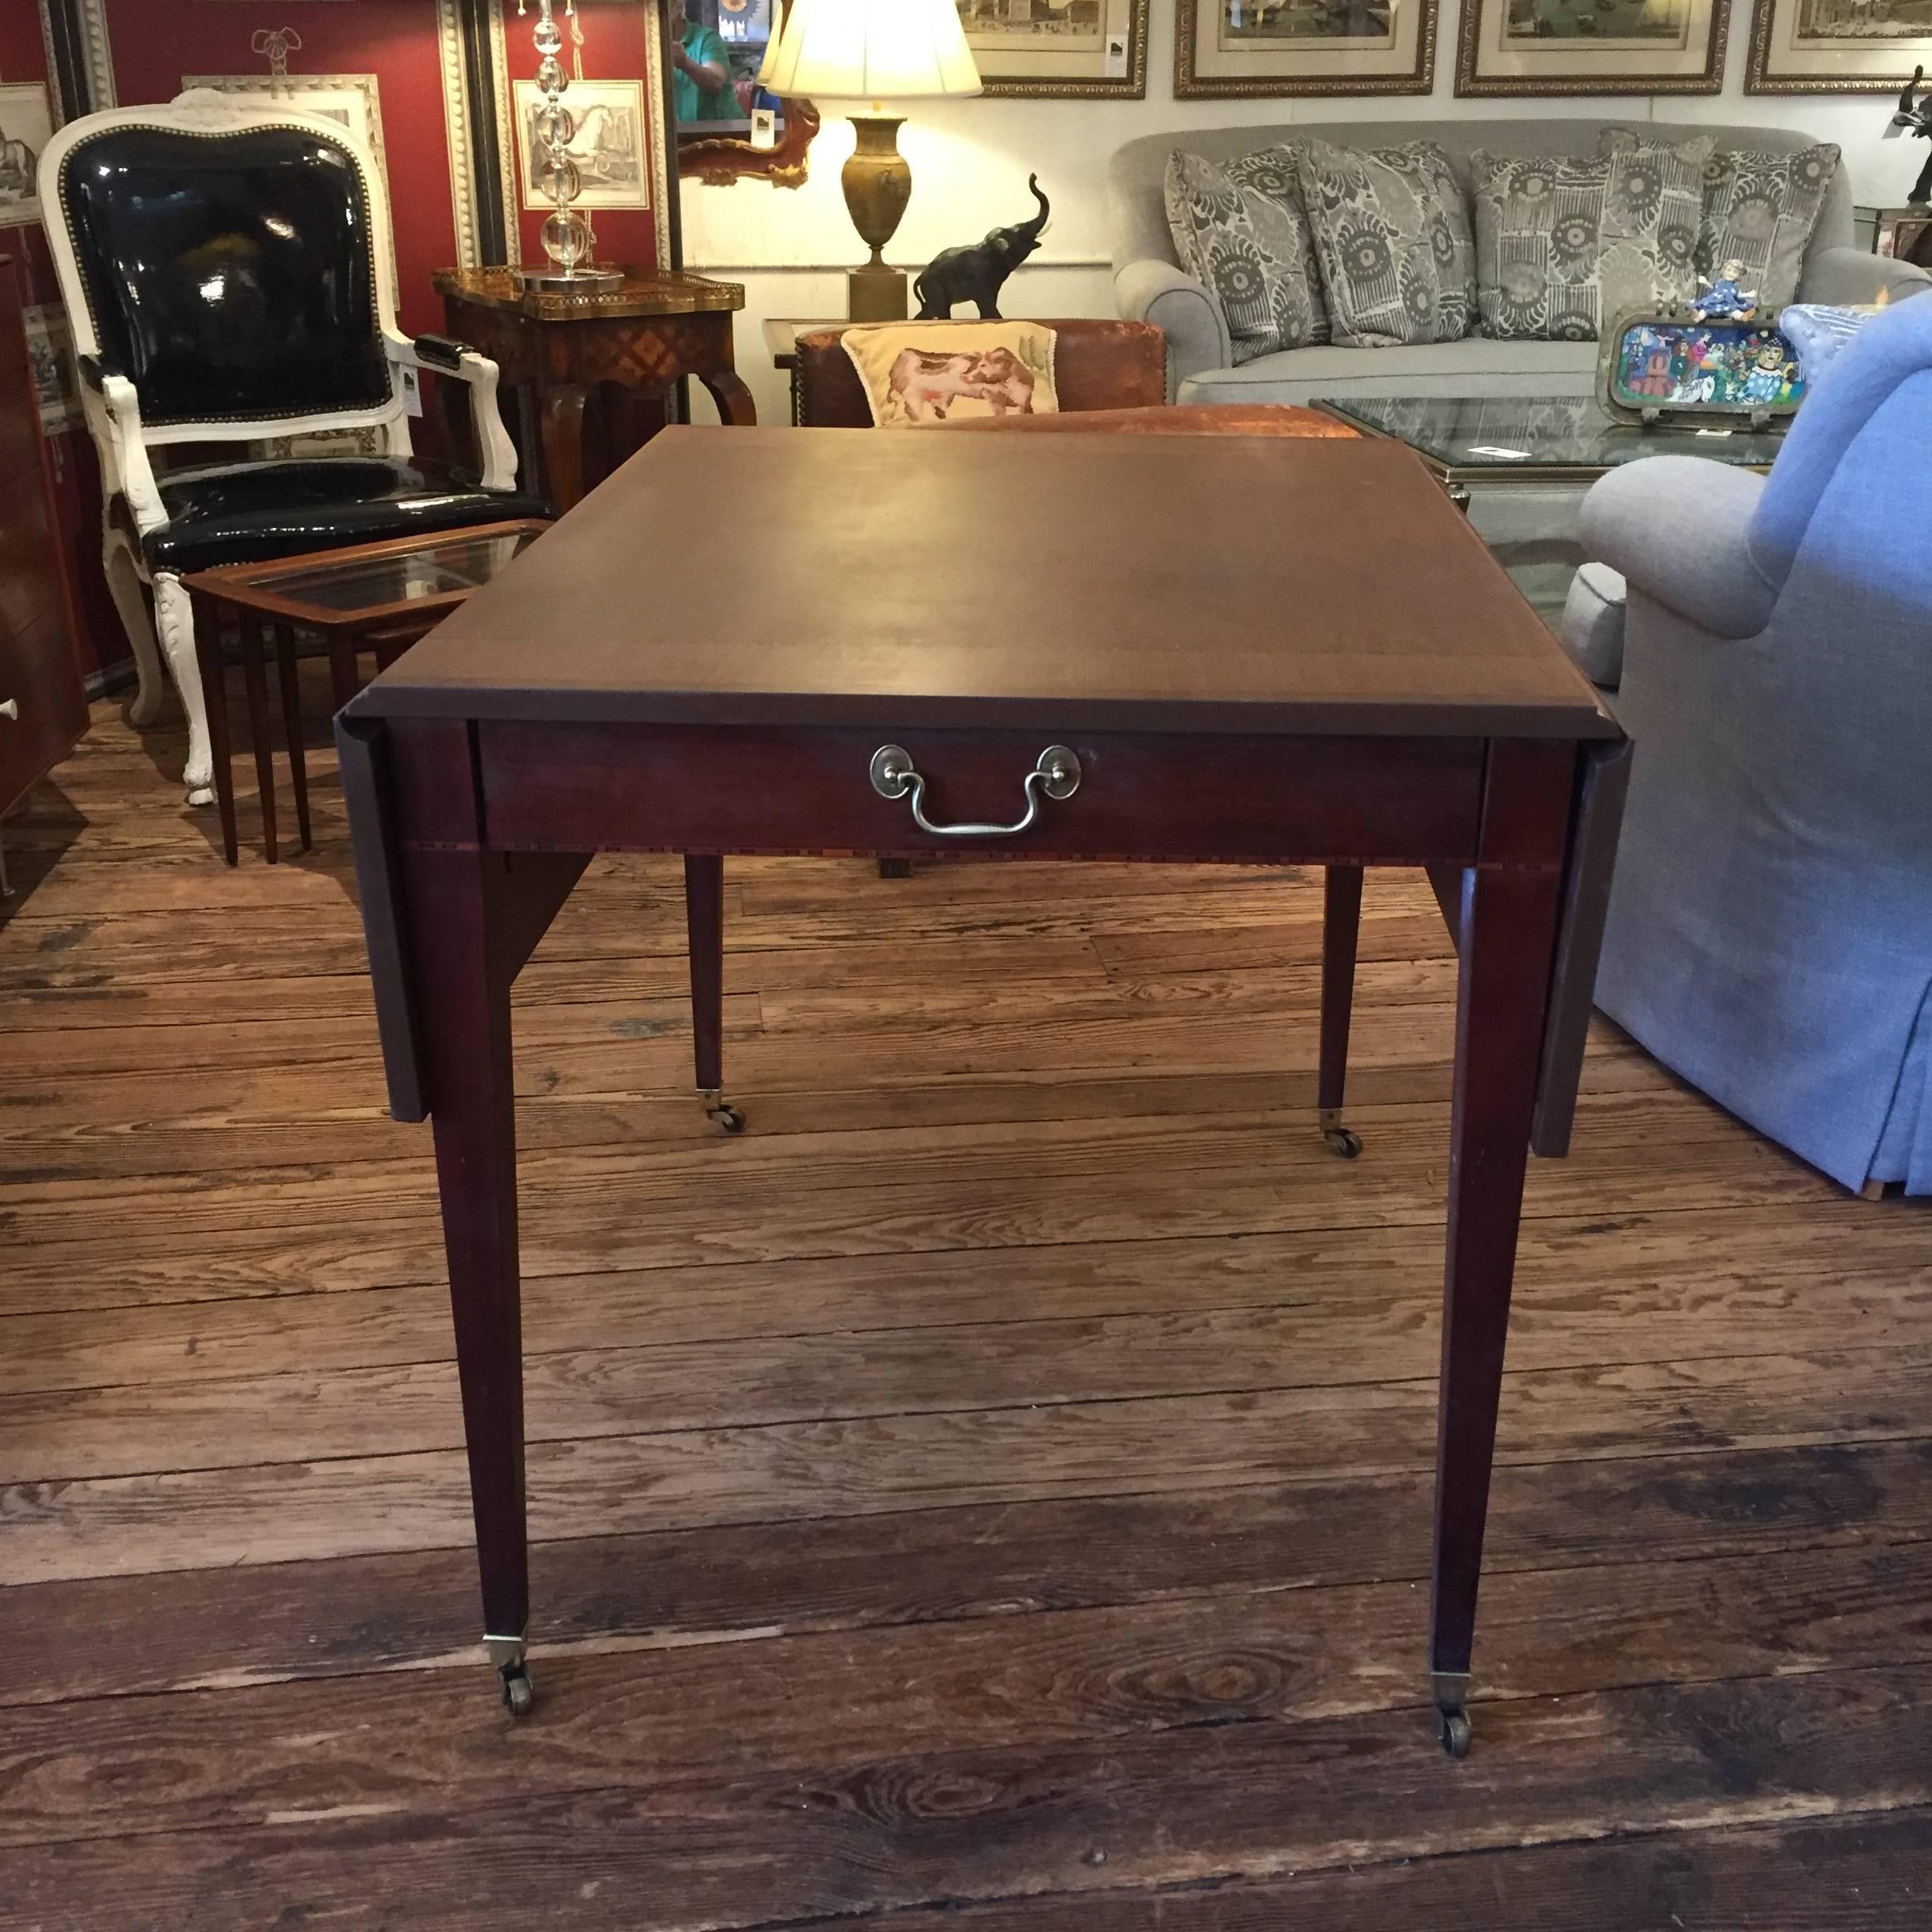 Very versatile traditional drop-leaf mahogany table having a single drawer, tapered legs on brass casters, and handsome inlay with different shades of wood. Label inside drawer.
Great behind a sofa, as a large side table, or a small dining table